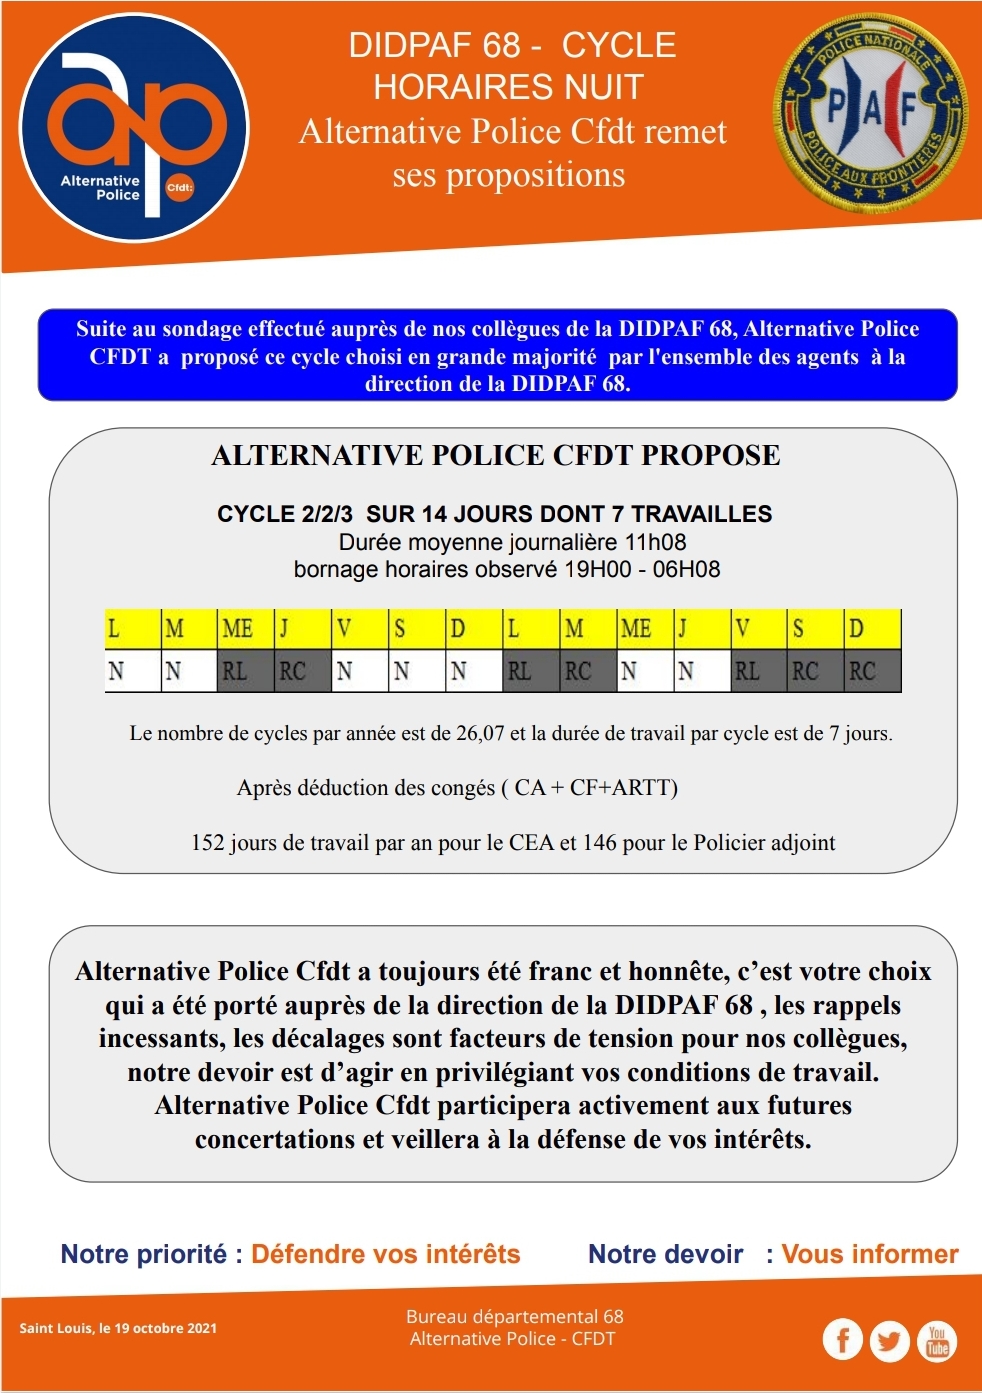 DIDPAF 68 - CYCLE HORAIRES NUIT Alternative Police Cfdt remet ses propositions